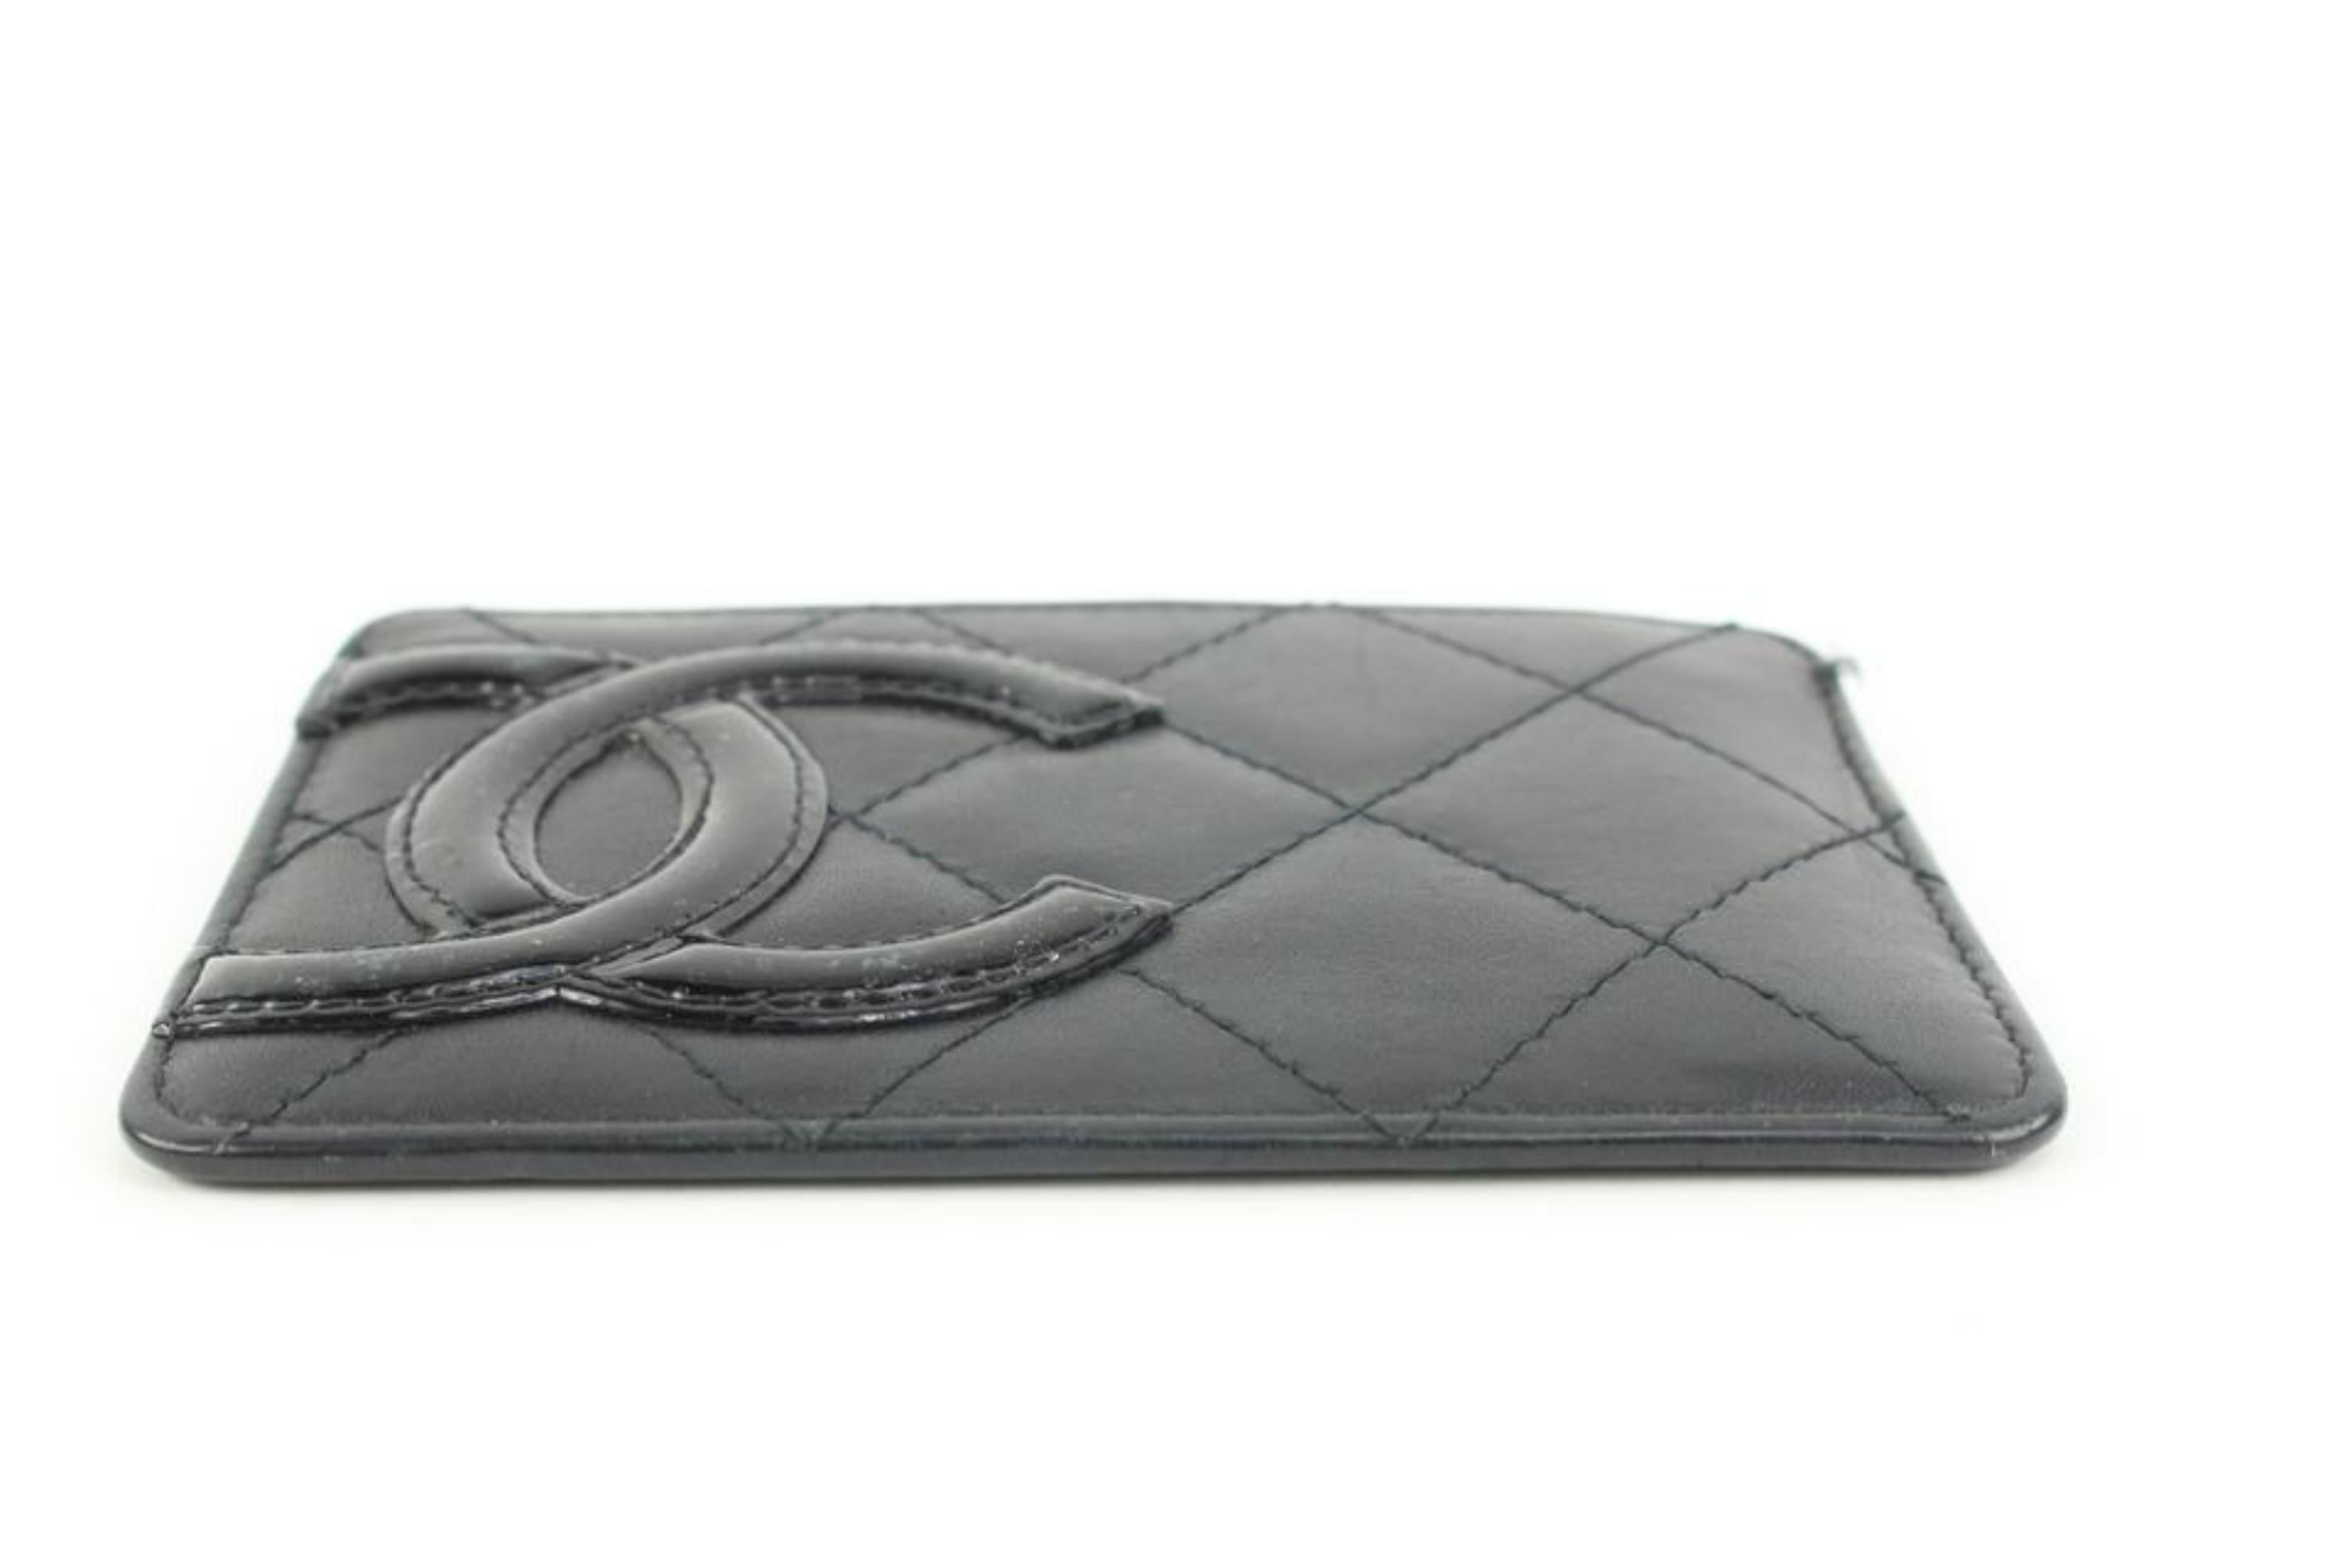 chanel phone wallet case